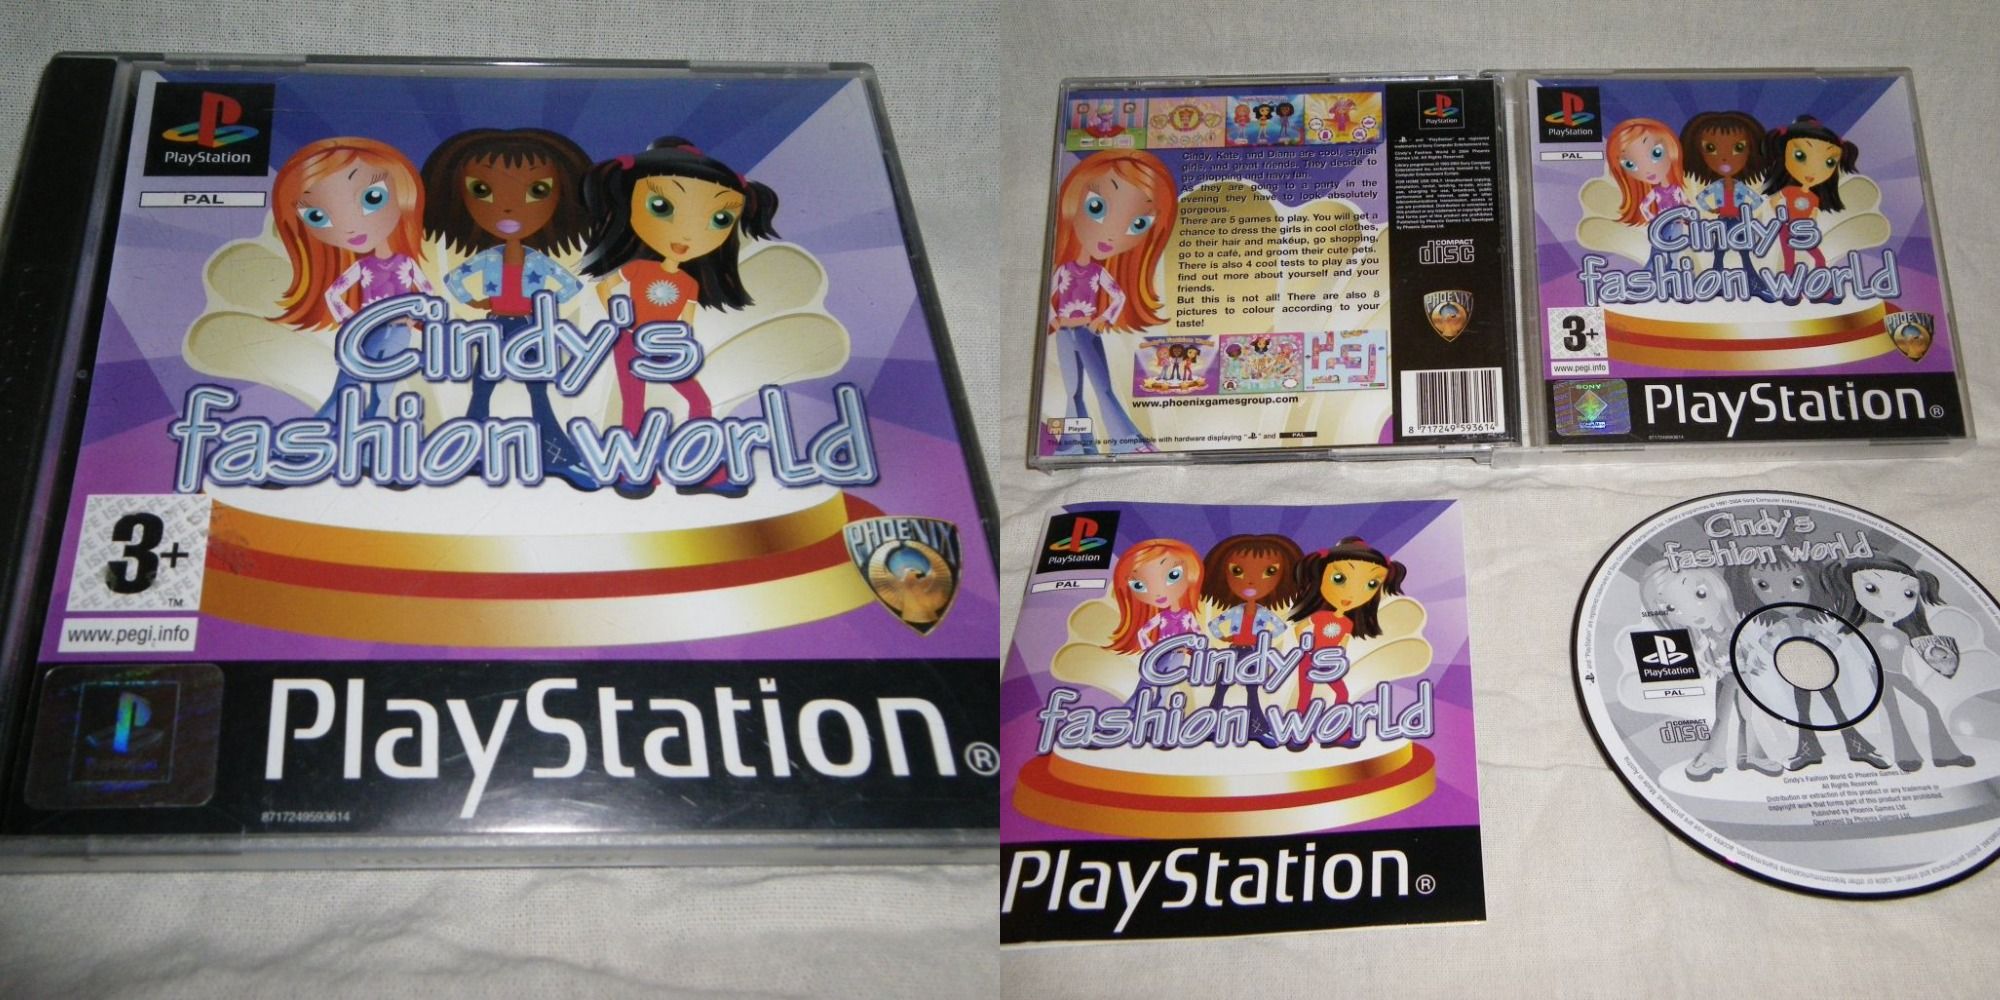 Cindy's Fashion World on the PS1 PAL version